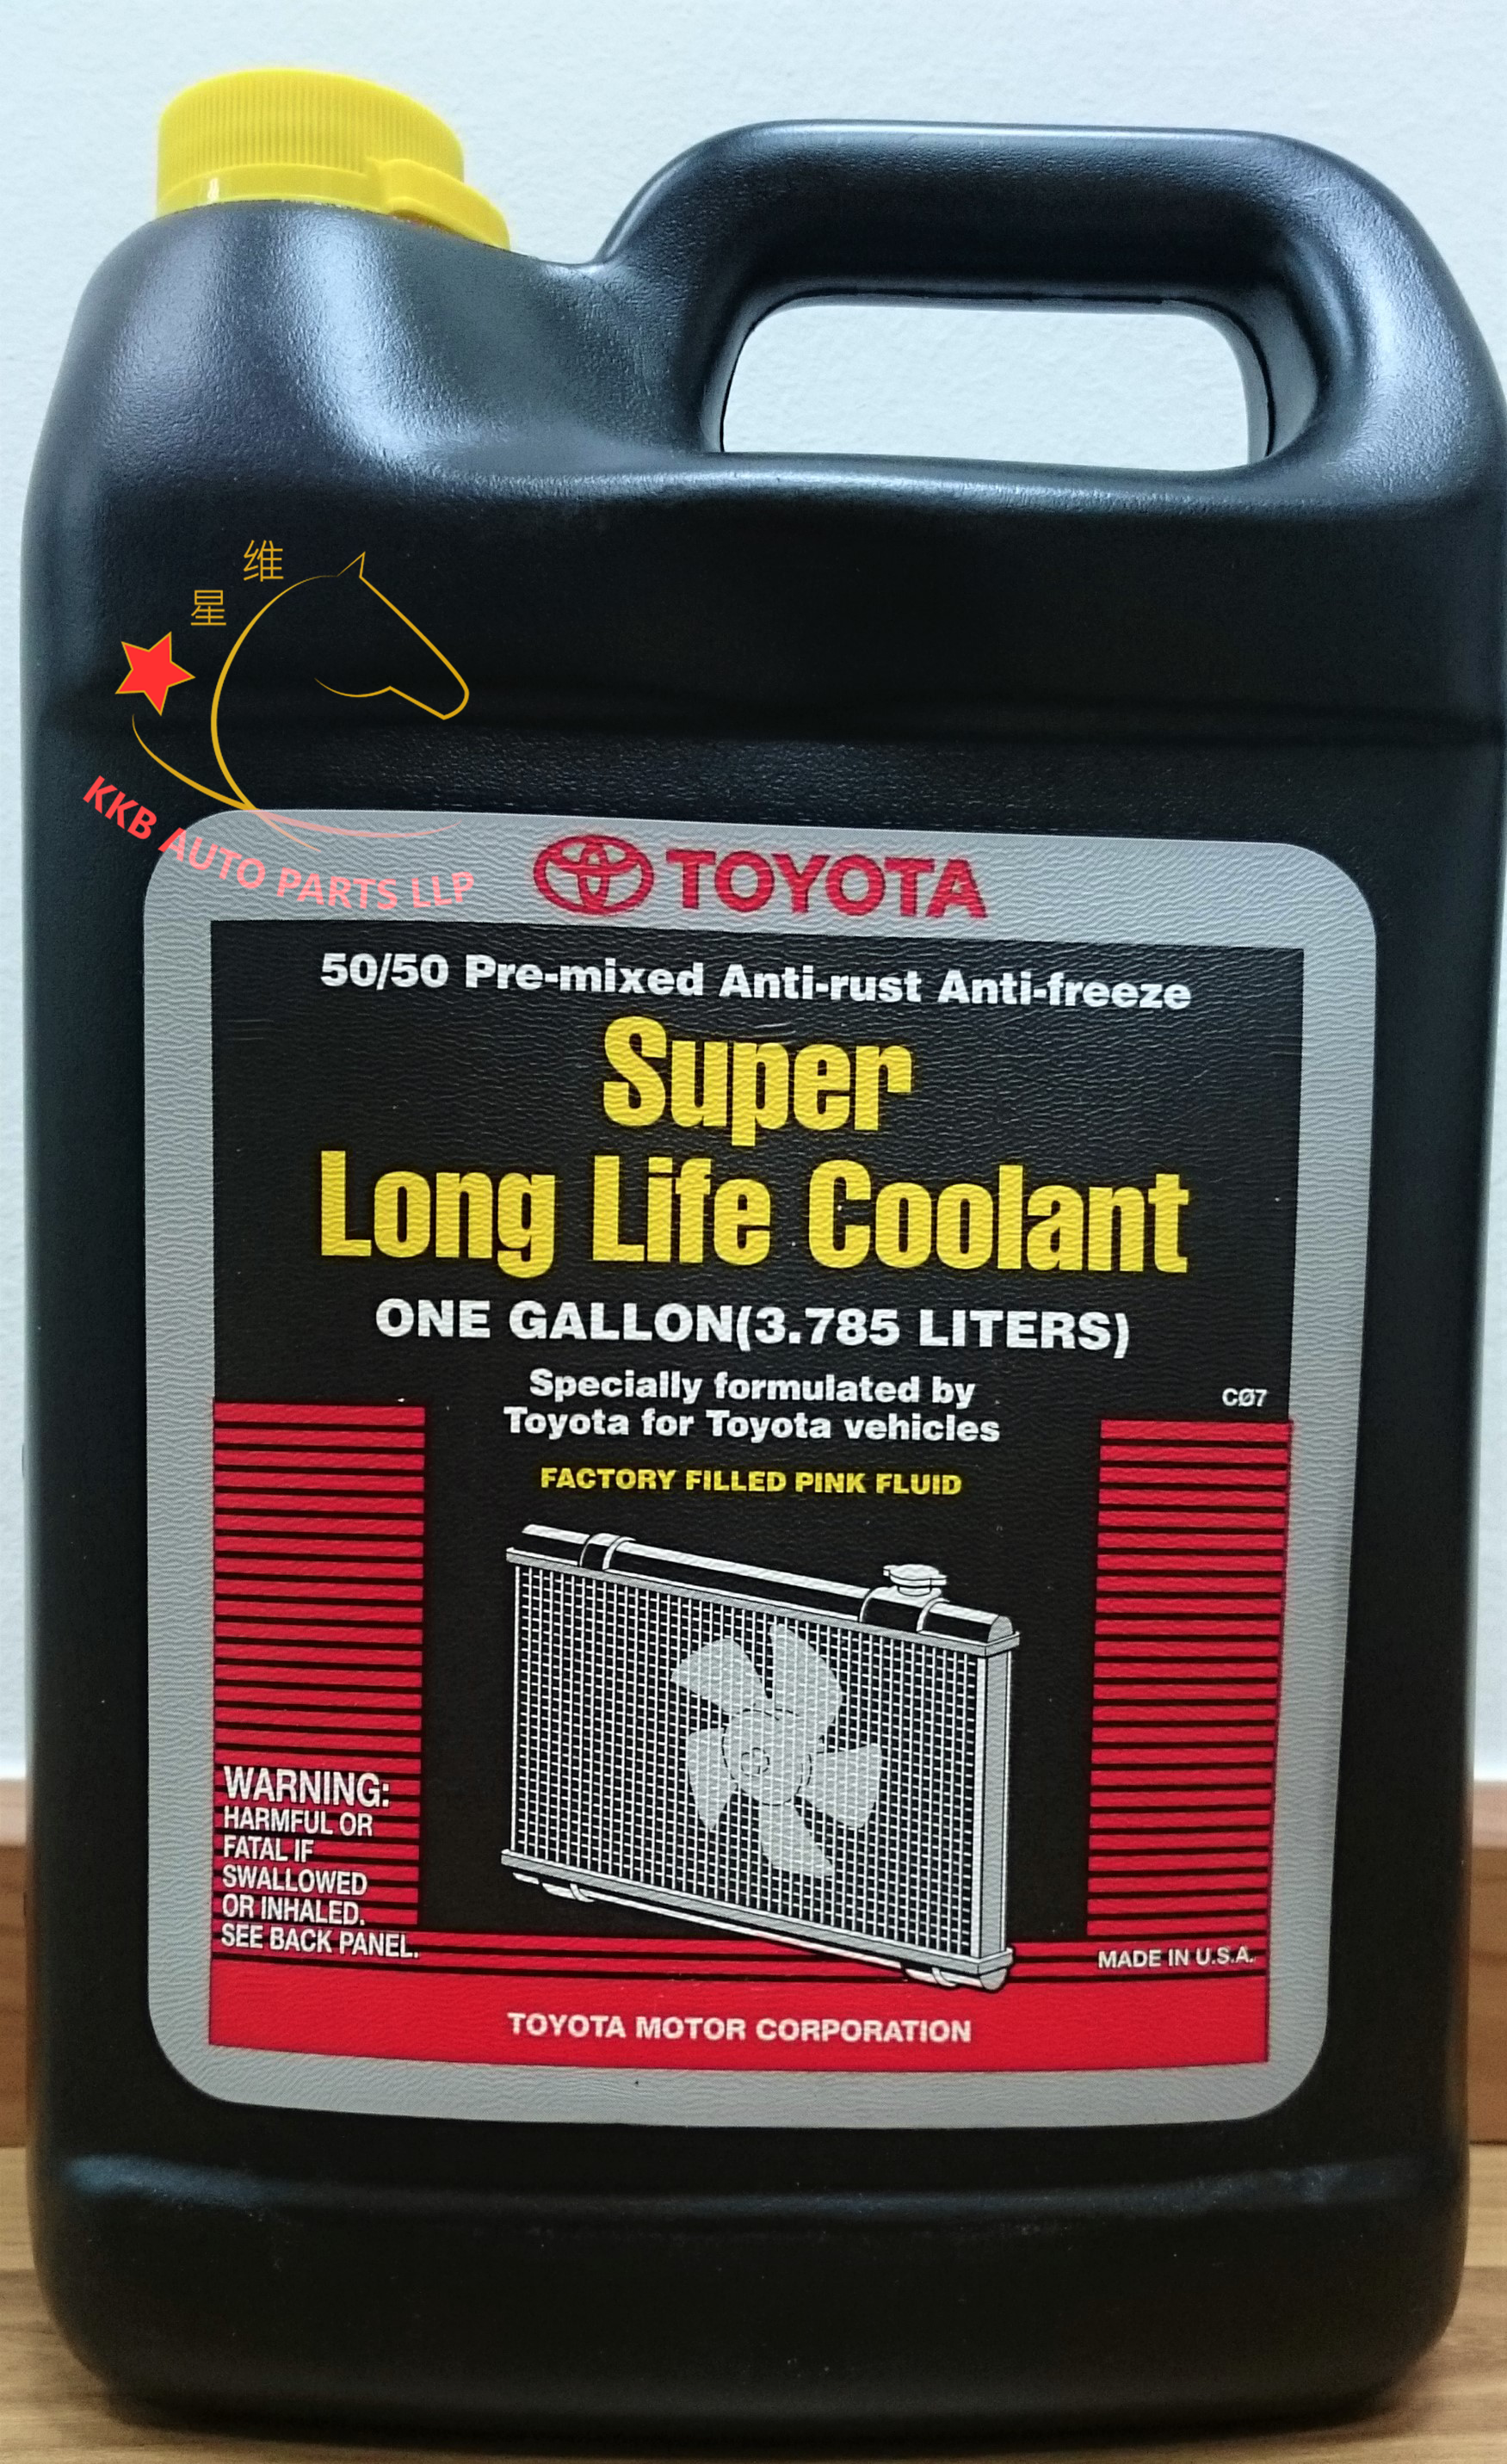 equivalent to toyota super long life coolant